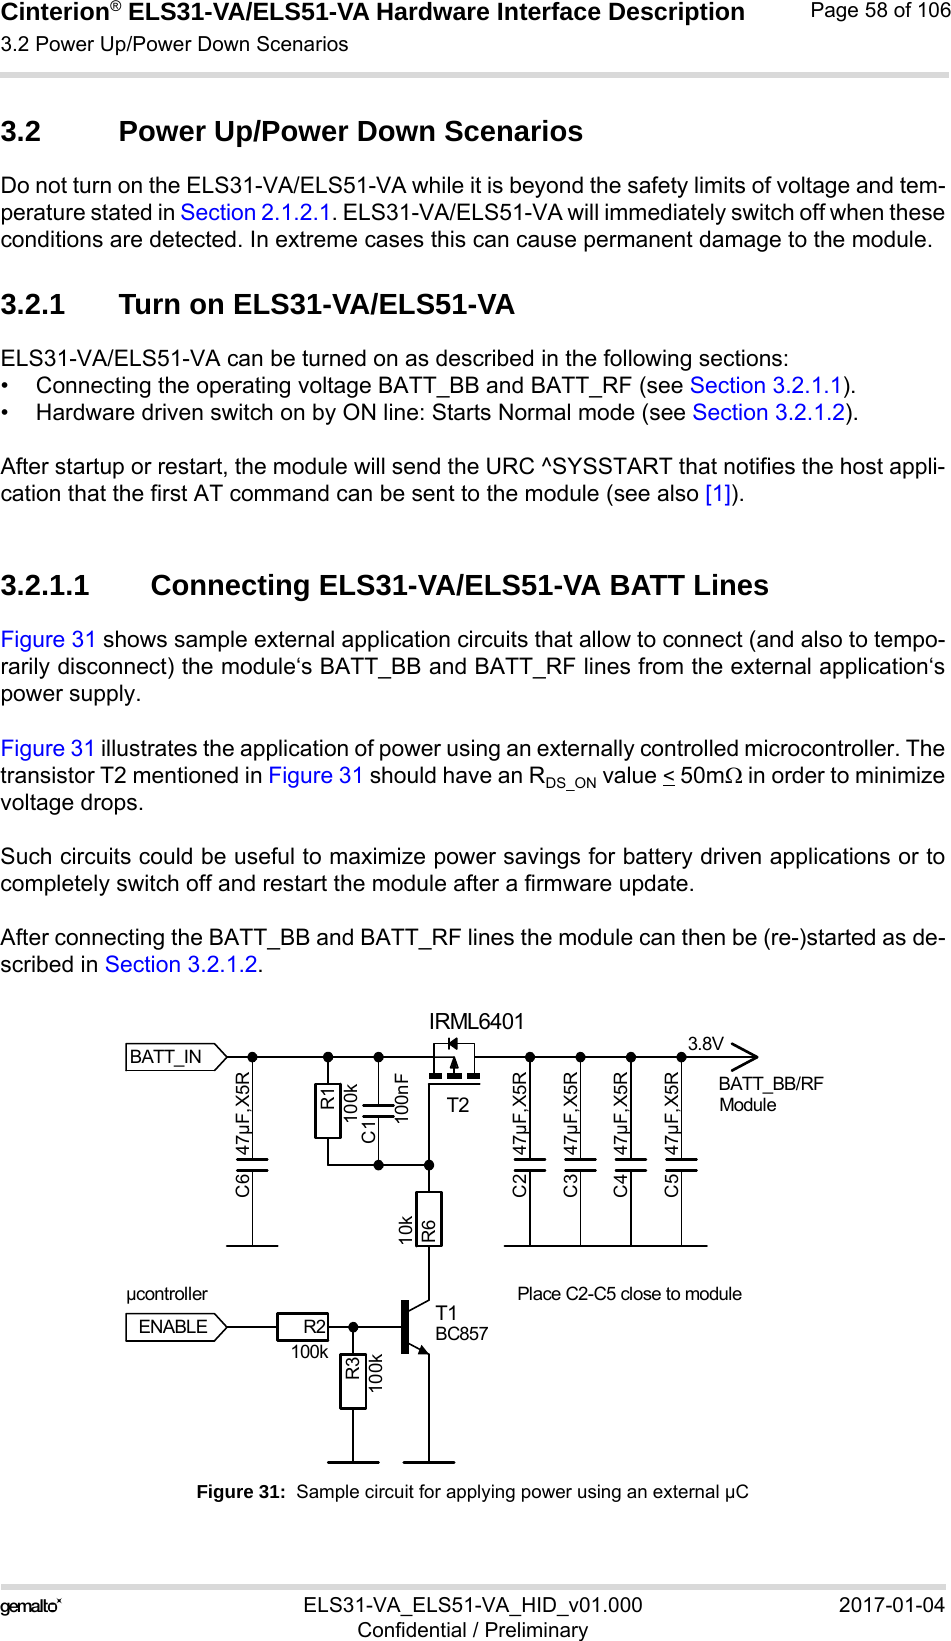 Cinterion® ELS31-VA/ELS51-VA Hardware Interface Description3.2 Power Up/Power Down Scenarios76ELS31-VA_ELS51-VA_HID_v01.000 2017-01-04Confidential / PreliminaryPage 58 of 1063.2 Power Up/Power Down ScenariosDo not turn on the ELS31-VA/ELS51-VA while it is beyond the safety limits of voltage and tem-perature stated in Section 2.1.2.1. ELS31-VA/ELS51-VA will immediately switch off when theseconditions are detected. In extreme cases this can cause permanent damage to the module.3.2.1 Turn on ELS31-VA/ELS51-VAELS31-VA/ELS51-VA can be turned on as described in the following sections:• Connecting the operating voltage BATT_BB and BATT_RF (see Section 3.2.1.1).• Hardware driven switch on by ON line: Starts Normal mode (see Section 3.2.1.2).After startup or restart, the module will send the URC ^SYSSTART that notifies the host appli-cation that the first AT command can be sent to the module (see also [1]).3.2.1.1 Connecting ELS31-VA/ELS51-VA BATT LinesFigure 31 shows sample external application circuits that allow to connect (and also to tempo-rarily disconnect) the module‘s BATT_BB and BATT_RF lines from the external application‘spower supply. Figure 31 illustrates the application of power using an externally controlled microcontroller. Thetransistor T2 mentioned in Figure 31 should have an RDS_ON value &lt; 50m in order to minimizevoltage drops. Such circuits could be useful to maximize power savings for battery driven applications or tocompletely switch off and restart the module after a firmware update.After connecting the BATT_BB and BATT_RF lines the module can then be (re-)started as de-scribed in Section 3.2.1.2.Figure 31:  Sample circuit for applying power using an external µC3.8VModulePlace C2-C5 close to moduleµcontrollerENABLEBATT_BB/RFBATT_INC1100nFC2 47µF,X5RC3 47µF,X5RC4 47µF,X5RC5 47µF,X5RC6 47µF,X5RR1100kR2100kR3100kR610kT1BC857T2IRML6401